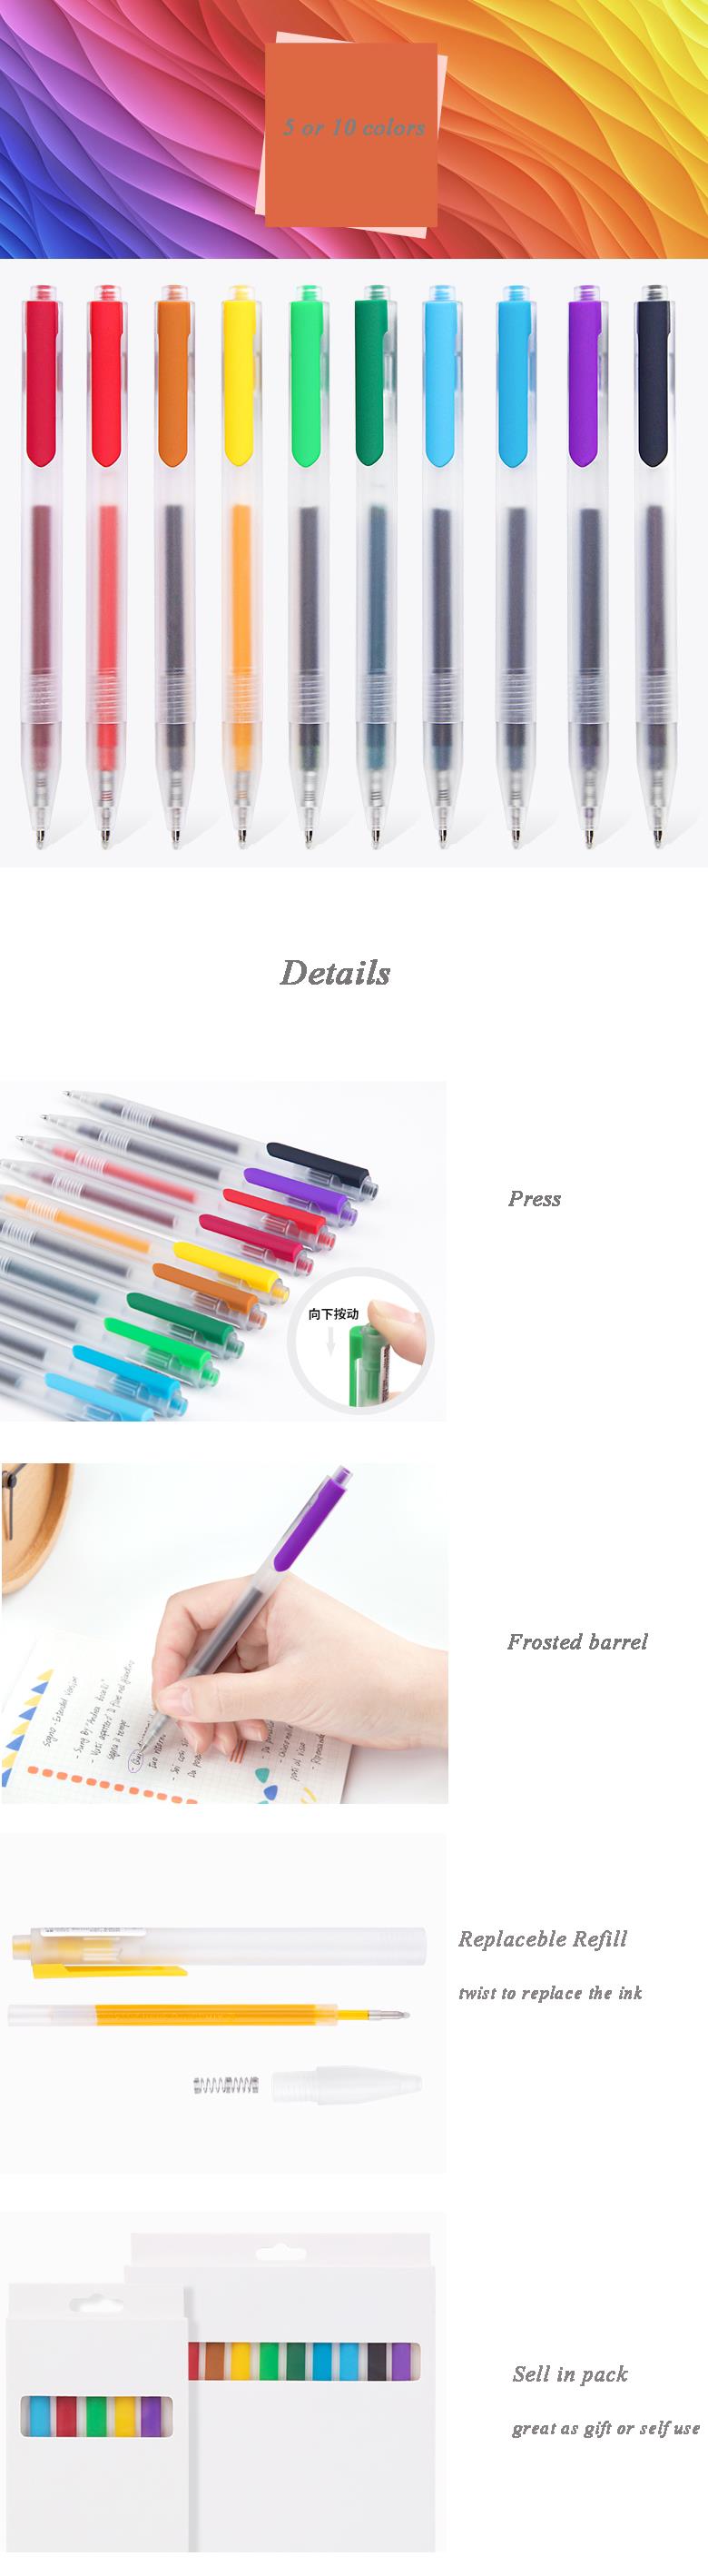 Kinbor-DTB6698-510-Colors-Colorful-Press-Gel-Pens-05mm-Frosted-Barrel-Drawing-Writing-Pen-Office-Sch-1538404-1